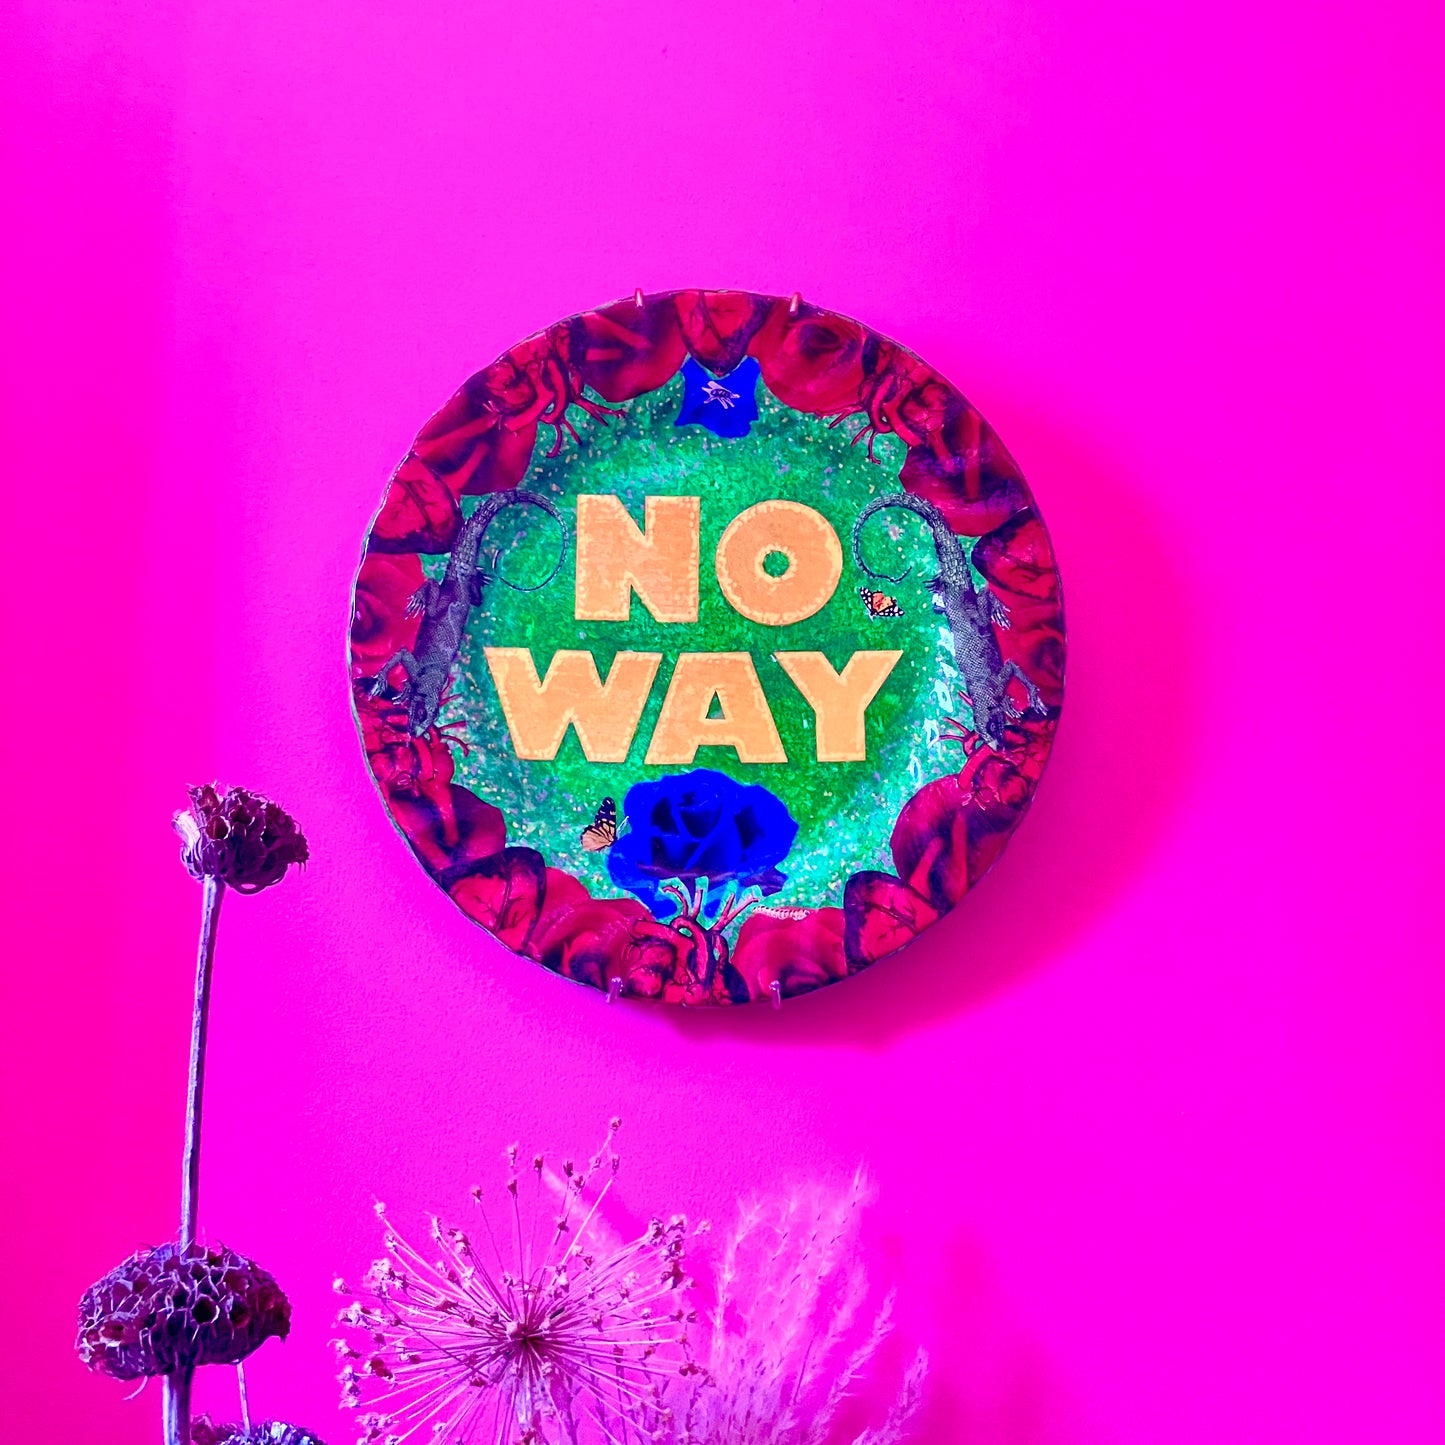 "No Way" one-of-a-kind collage artwork on upcycled wall plate by House of Frisson. Featuring the words "No Way" framed with a collage of roses, and lizards, on a green background. Plate hanging on a pink wall.